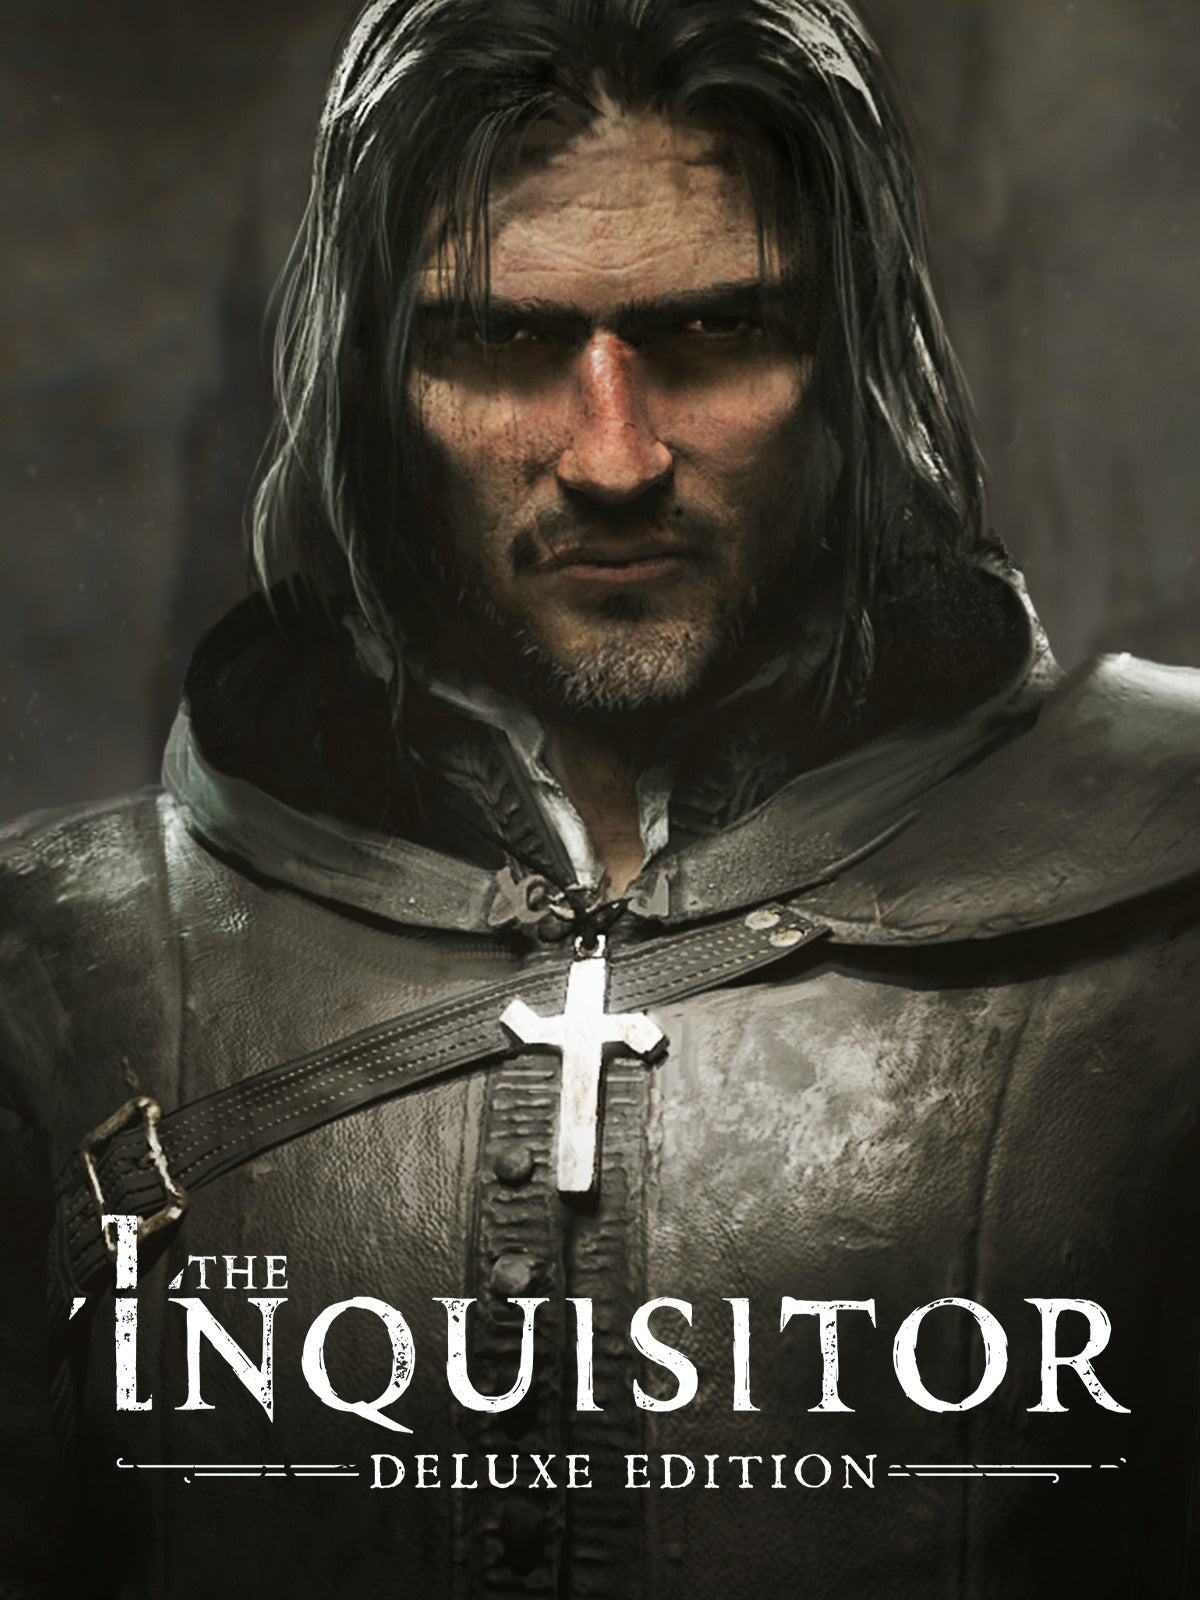 The Inquisitor (Deluxe Edition) - Xbox